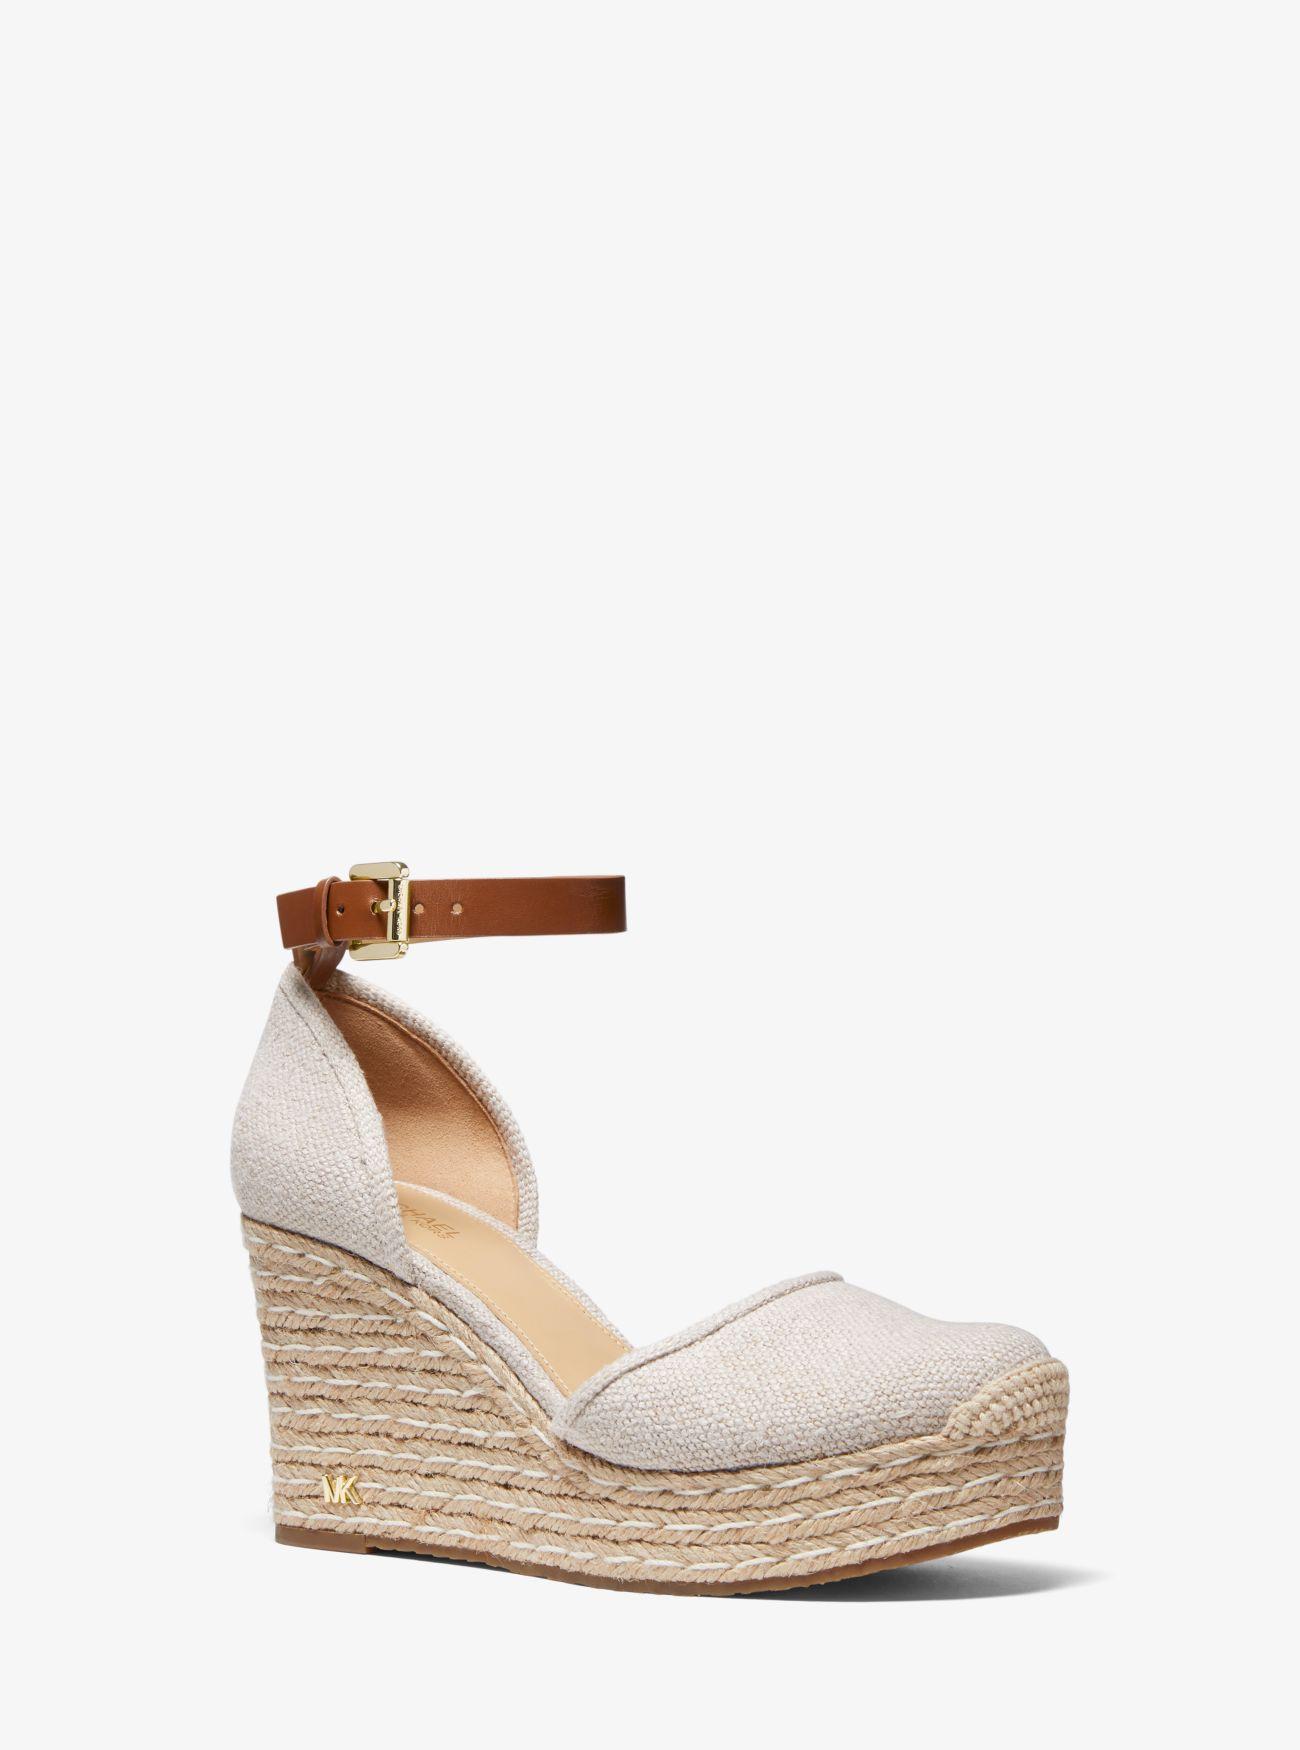 MICHAEL Michael Kors Logo Leather Wedge Sandals in White (Natural 